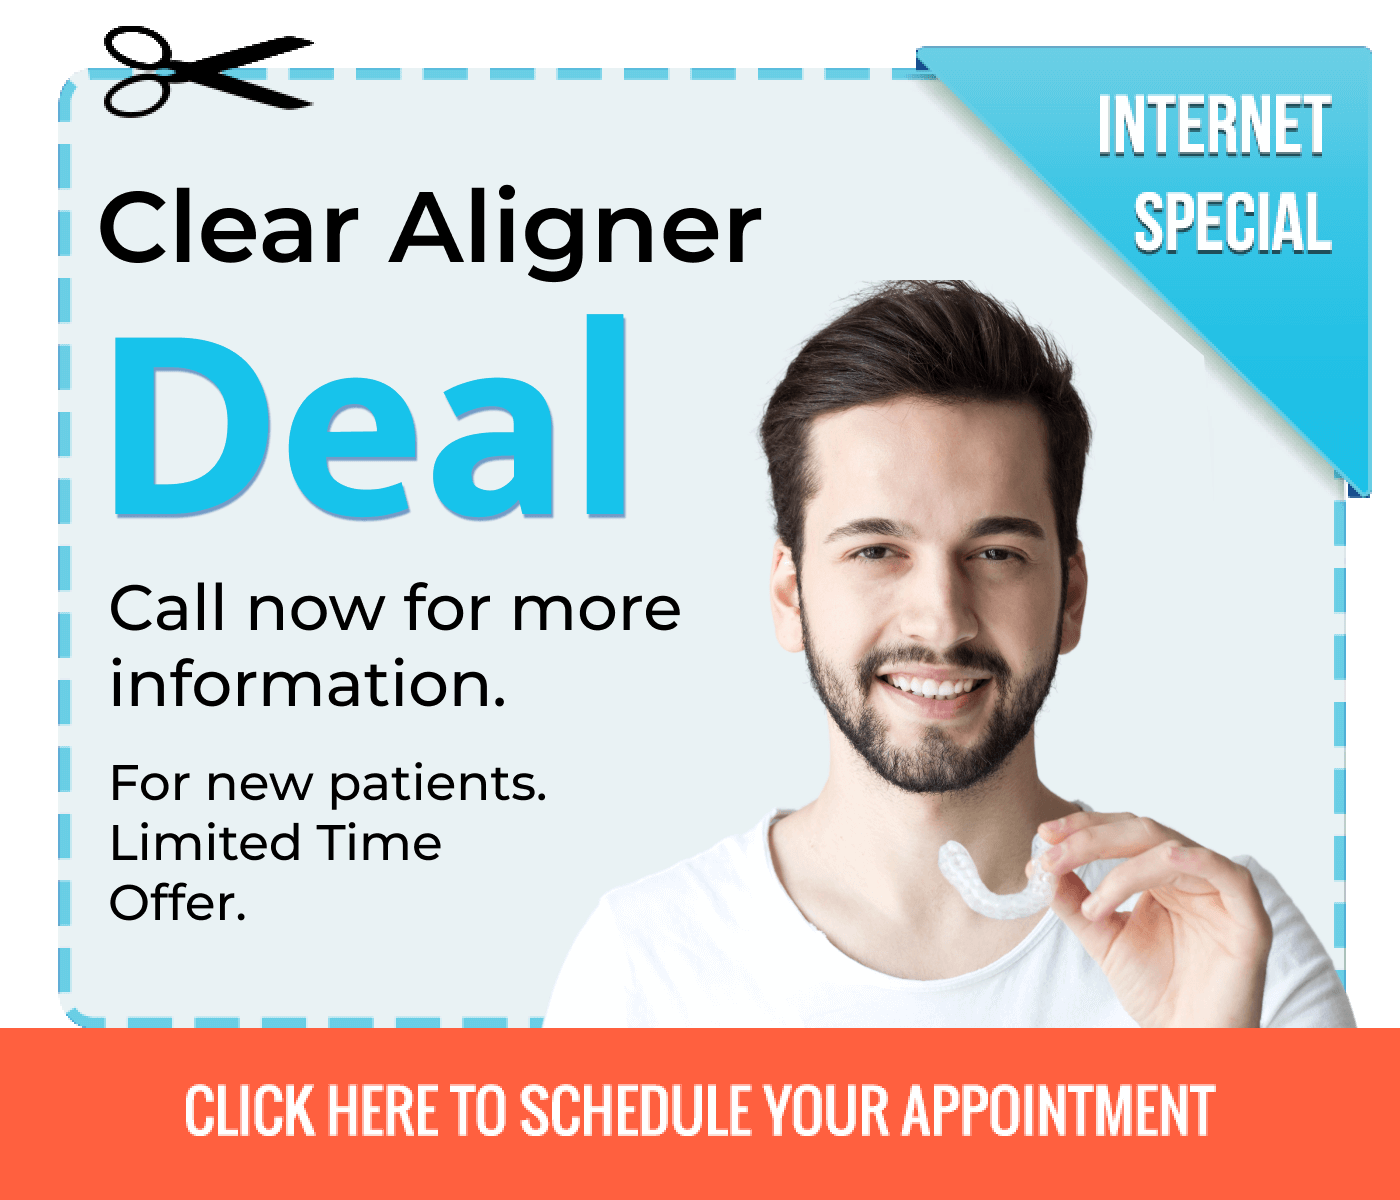 Aligners Specials for New Patients